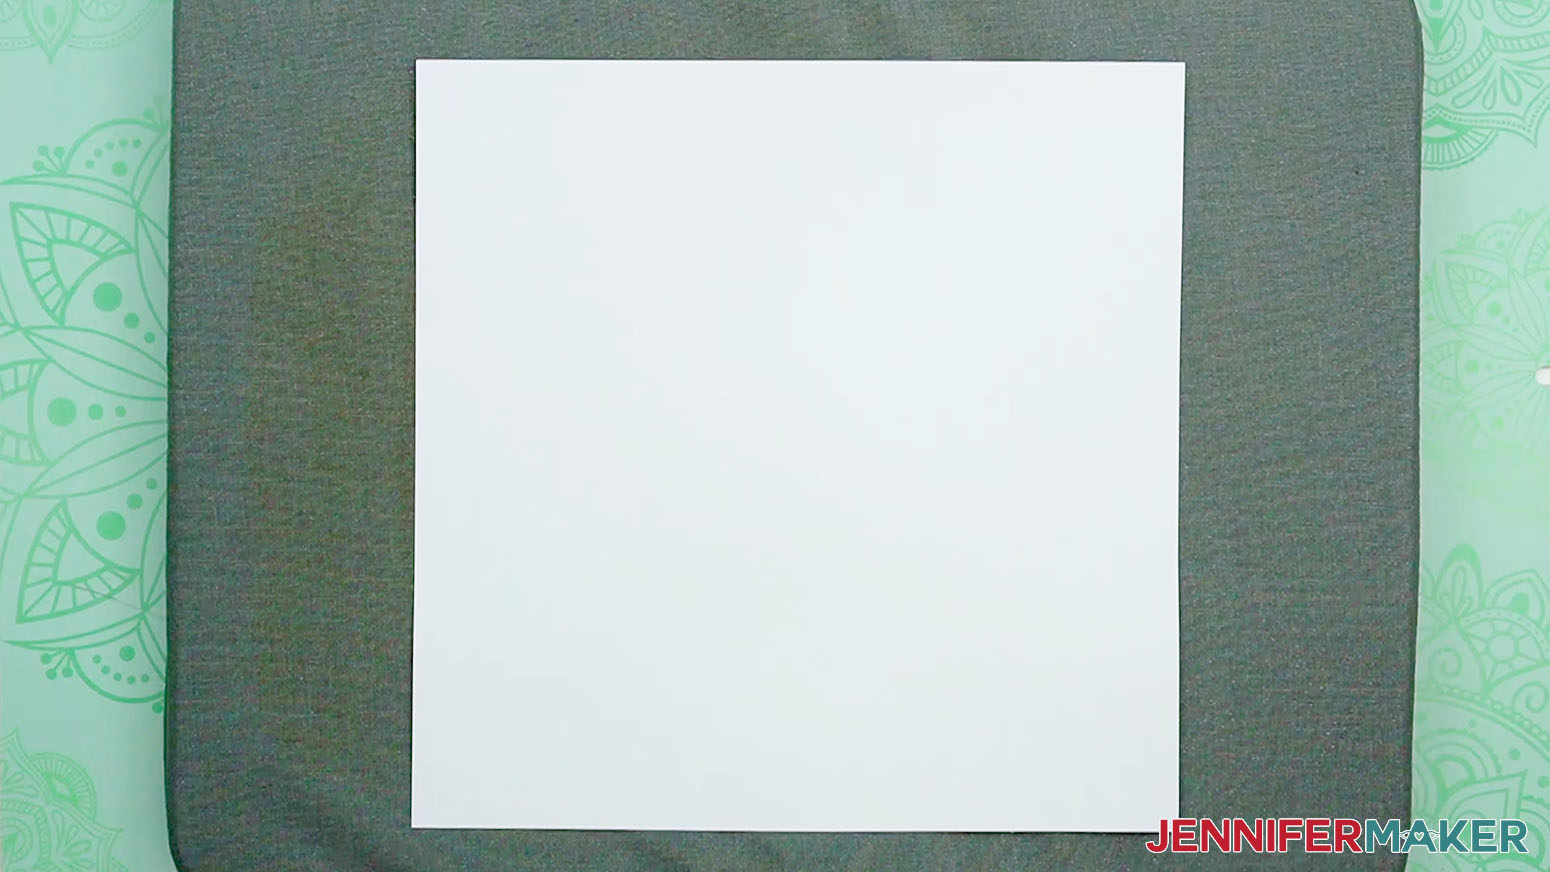 Place a sheet of blowout paper on the pressing mat.